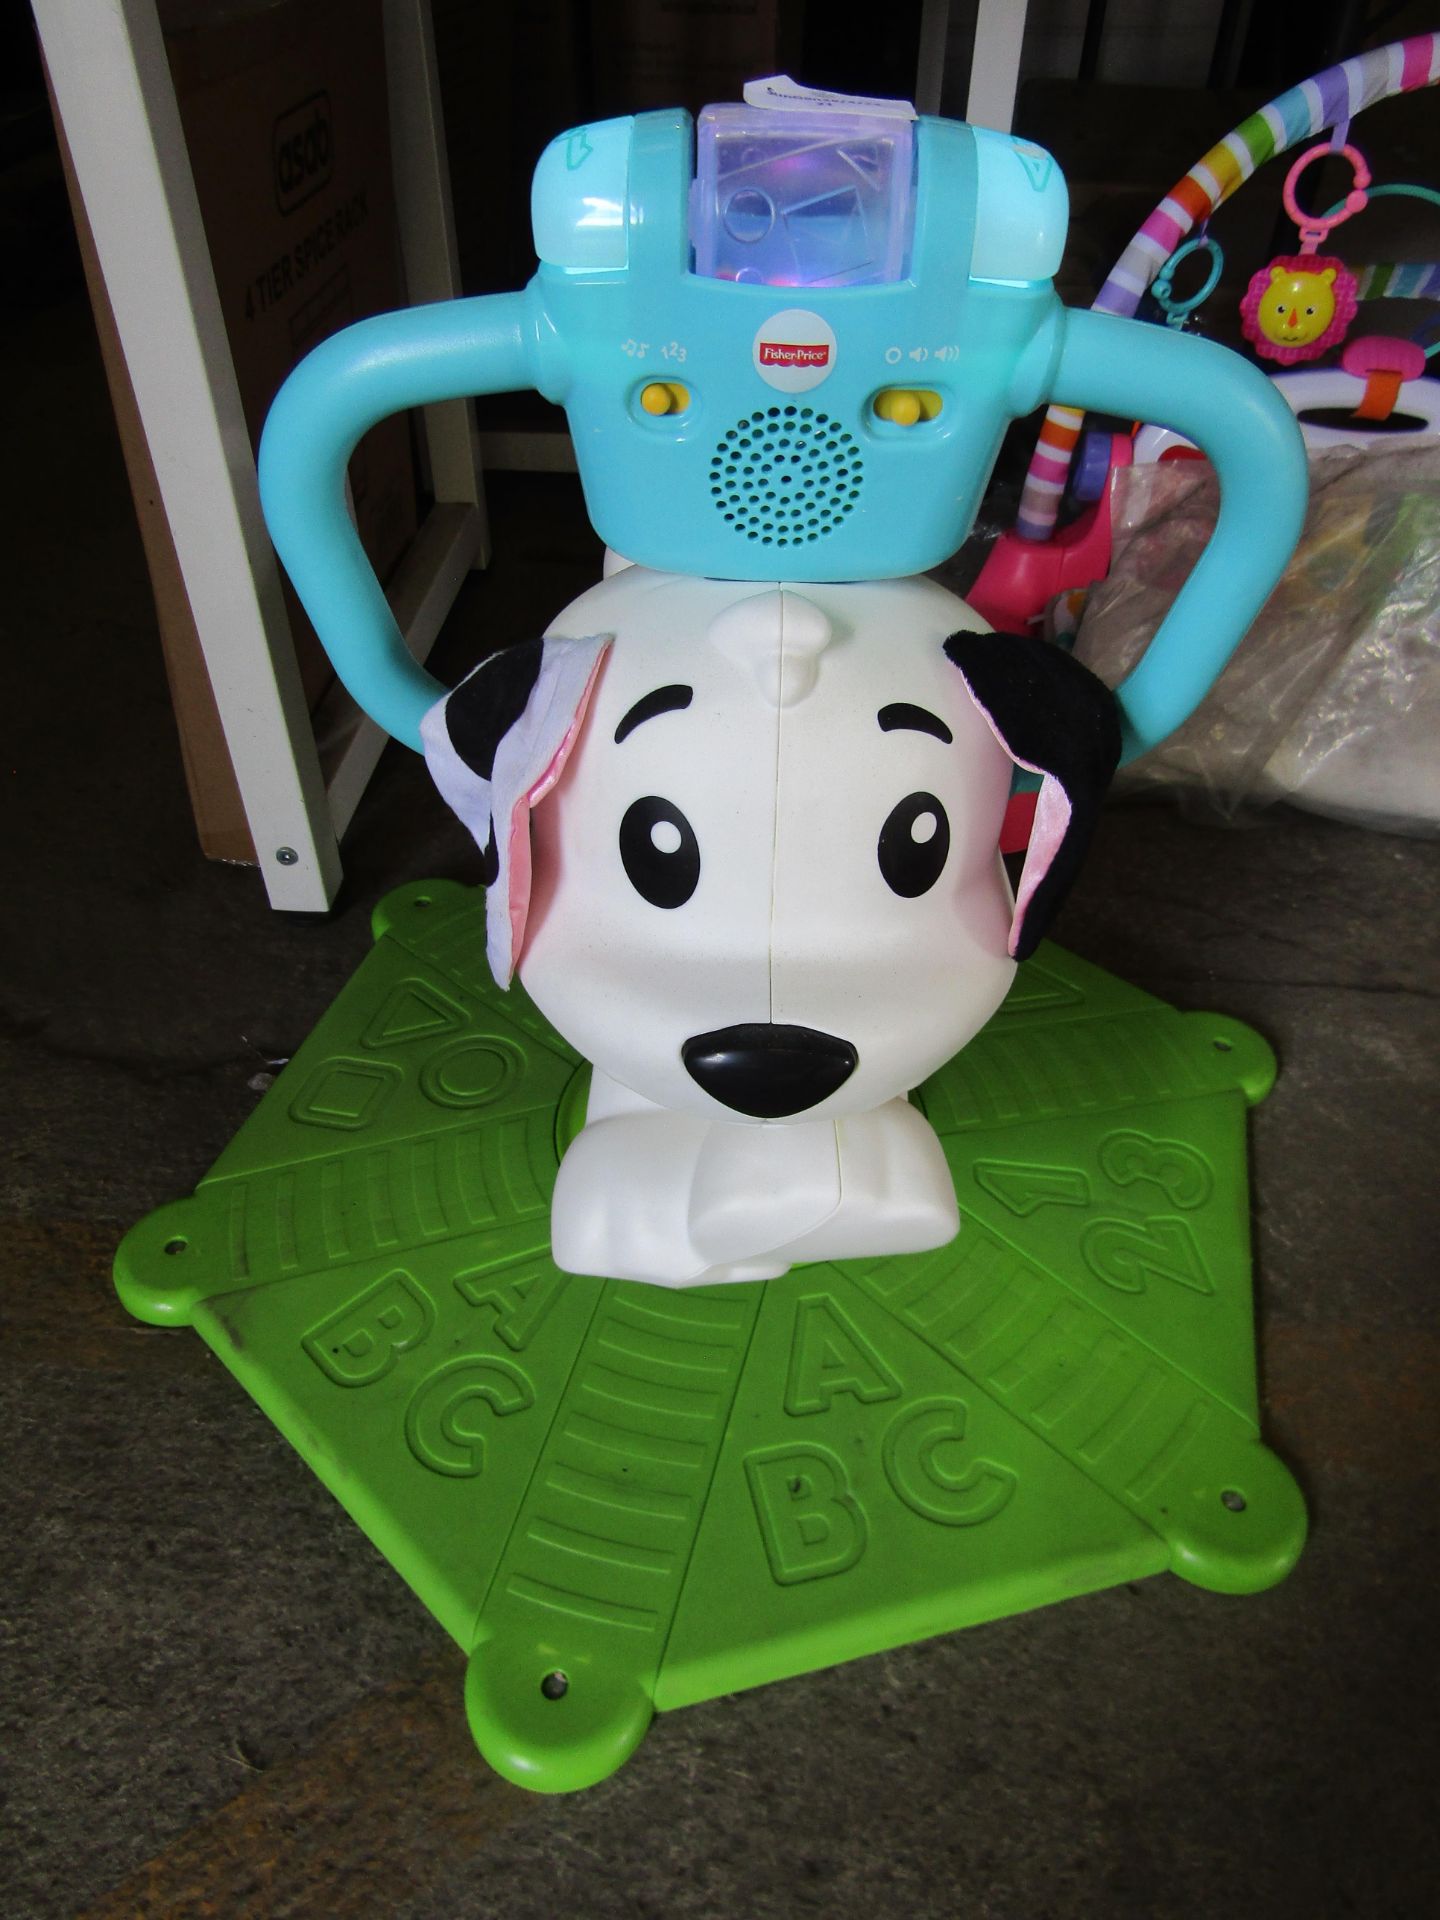 Fisher Price Bounce & Spin Puppy With Music & Learning Features - Very Good Condition, Working